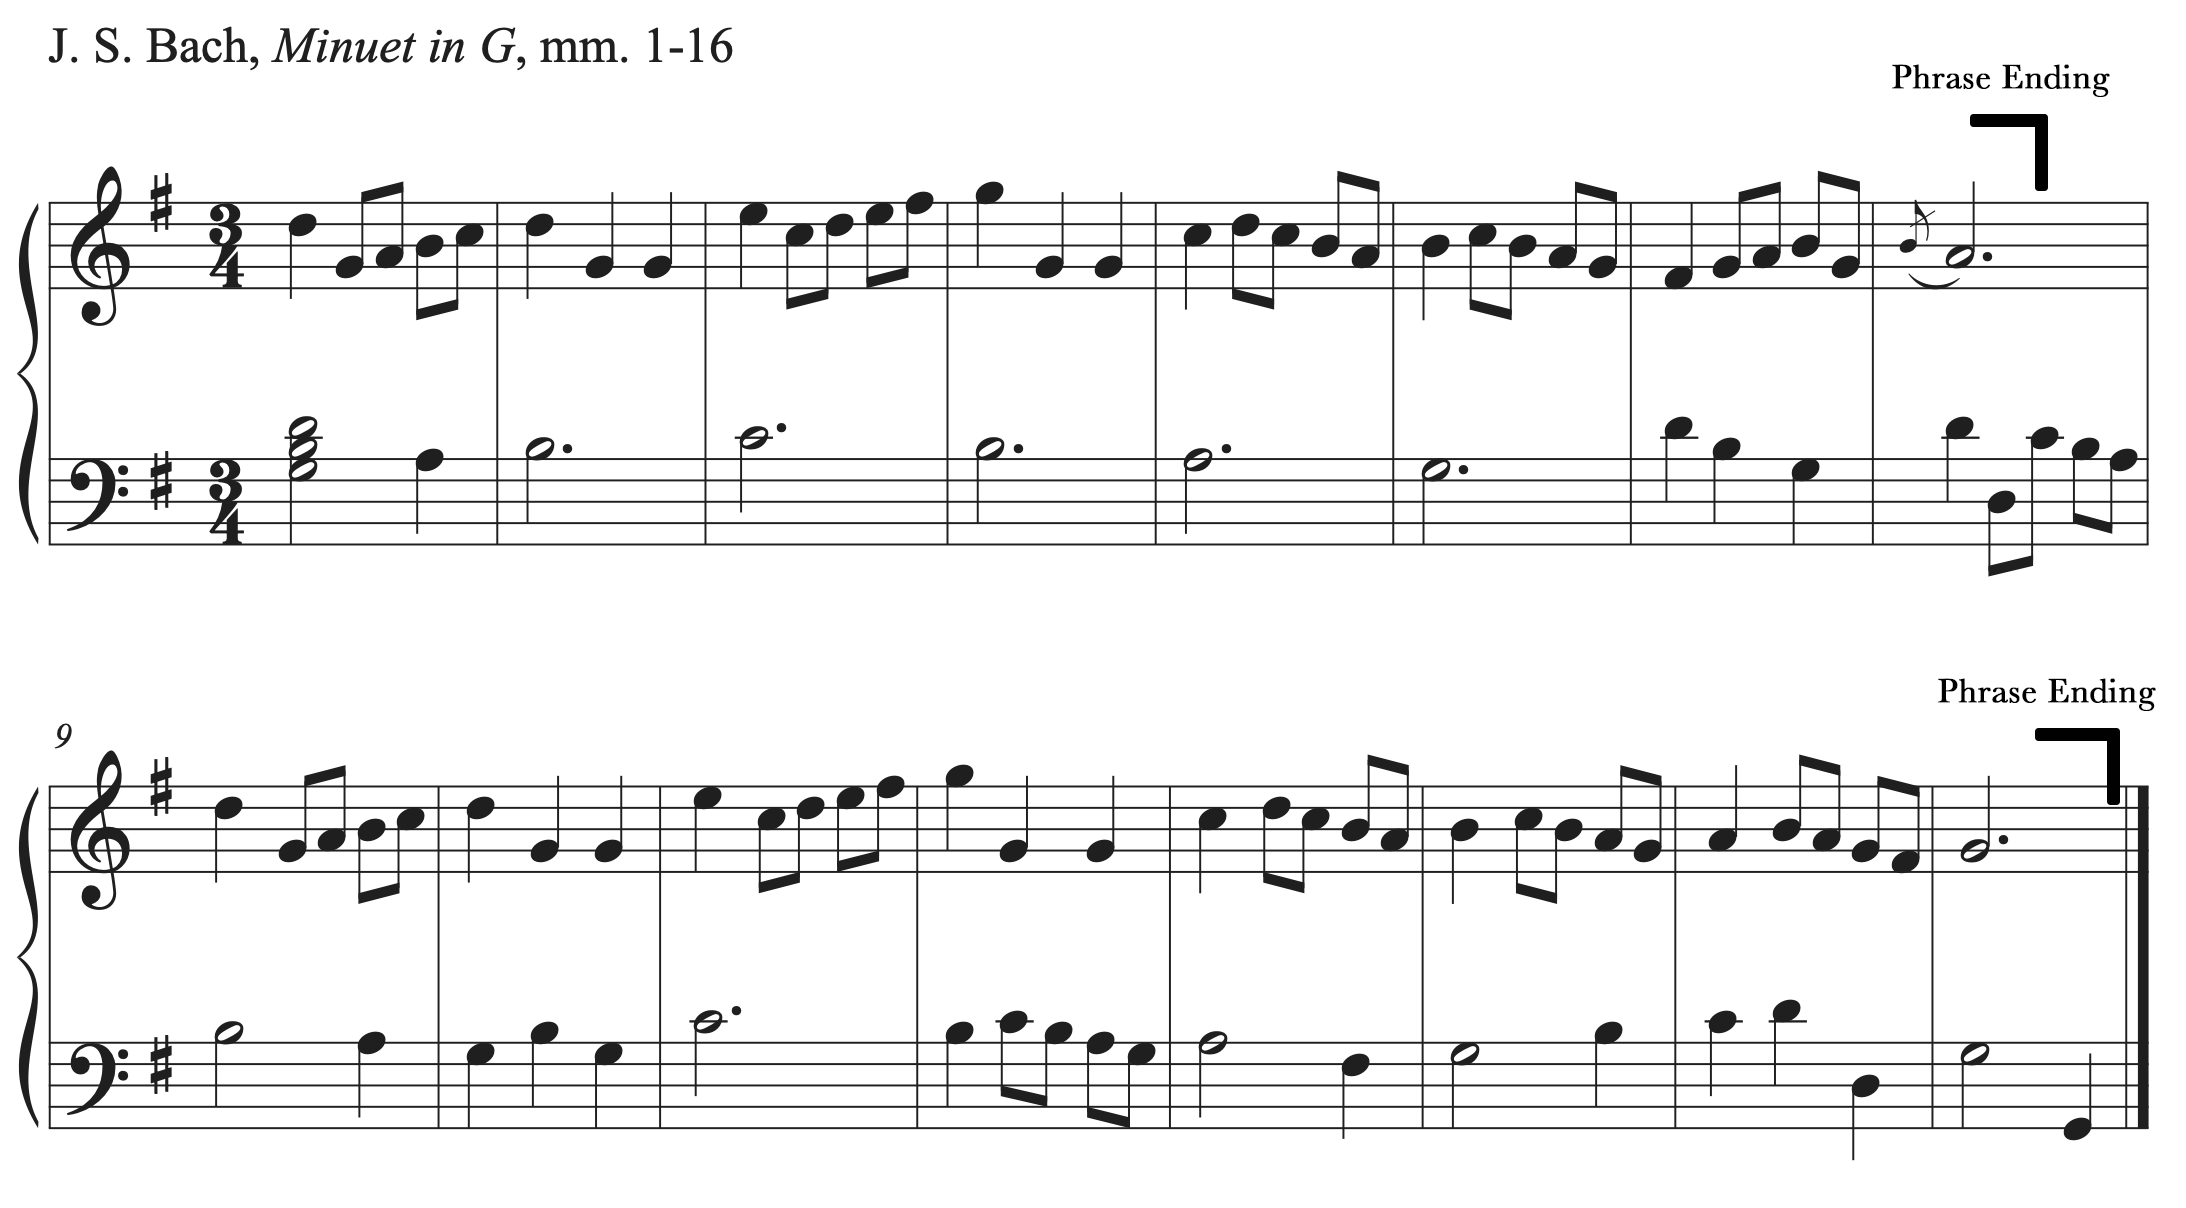 Excerpt from J.S. Bach's Minuet in G with phrase endings marked with brackets.